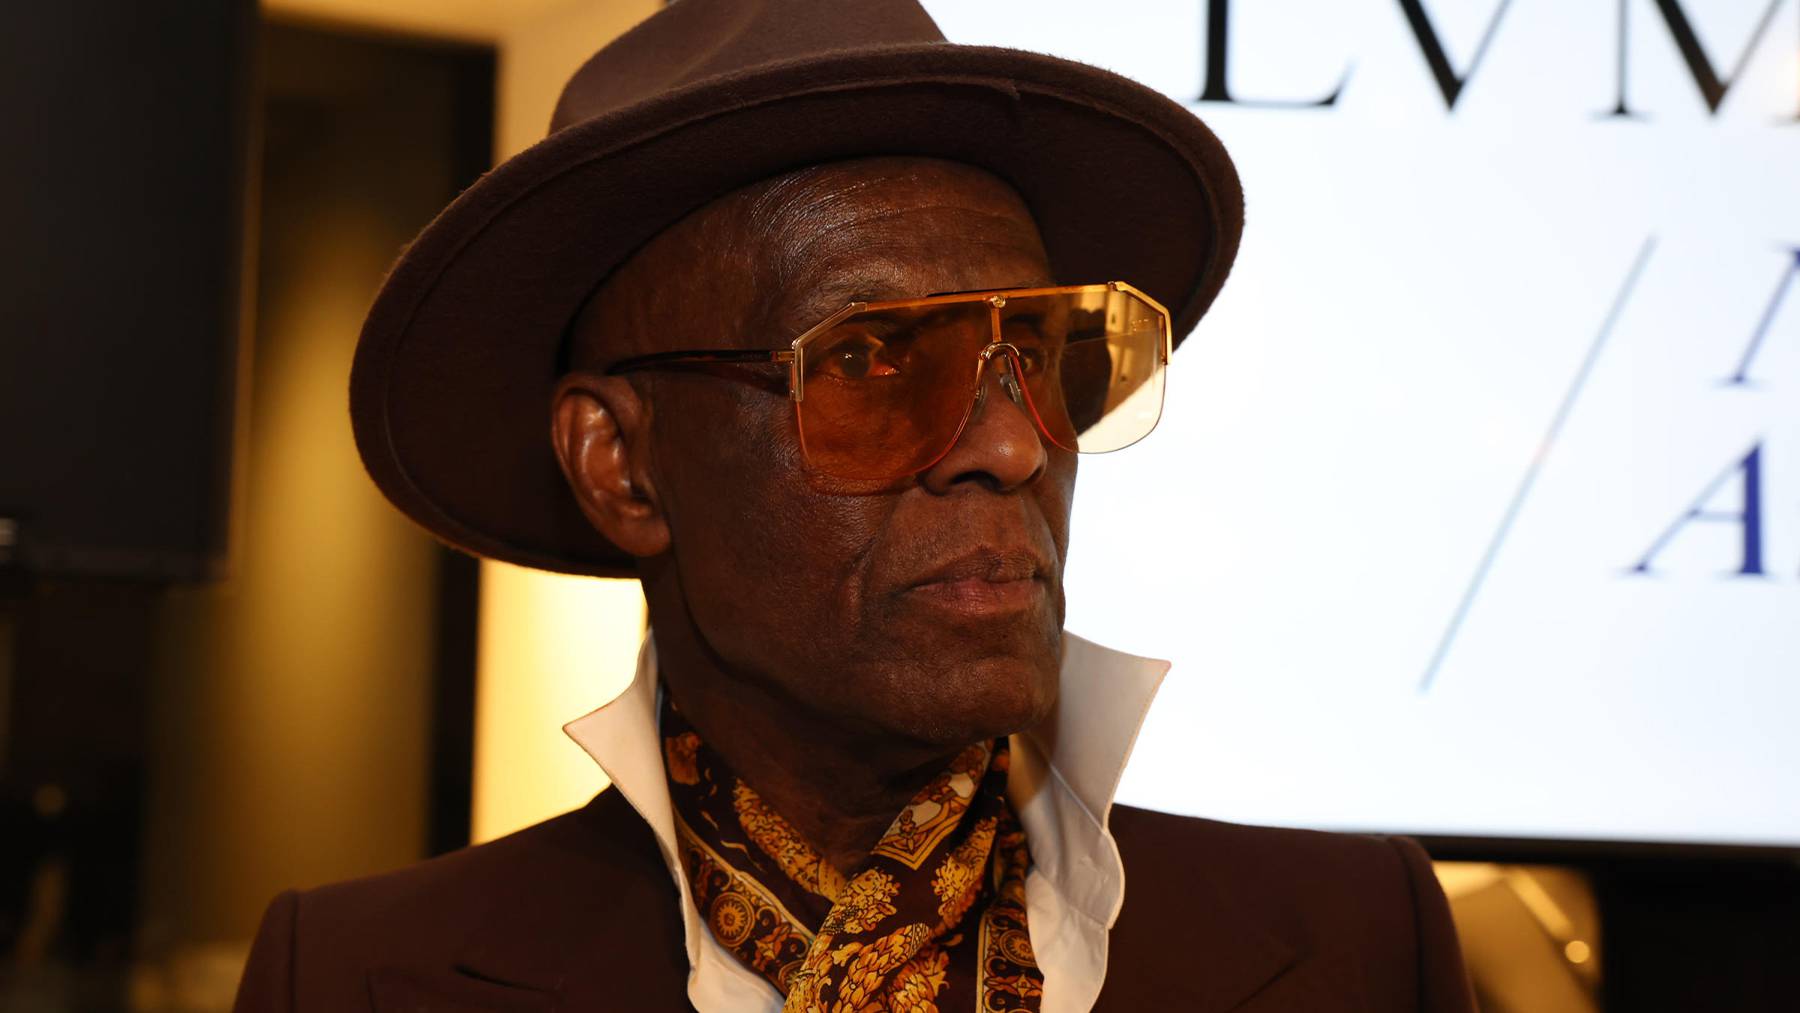 Dapper Dan participated in a fireside chat with television and radio personality Rocsi Diaz, where he discussed everything from his storied career dressing rappers like LL Cool J and Rakim to his opinion on Louis Vuitton’s appointment of Pharrell Williams.